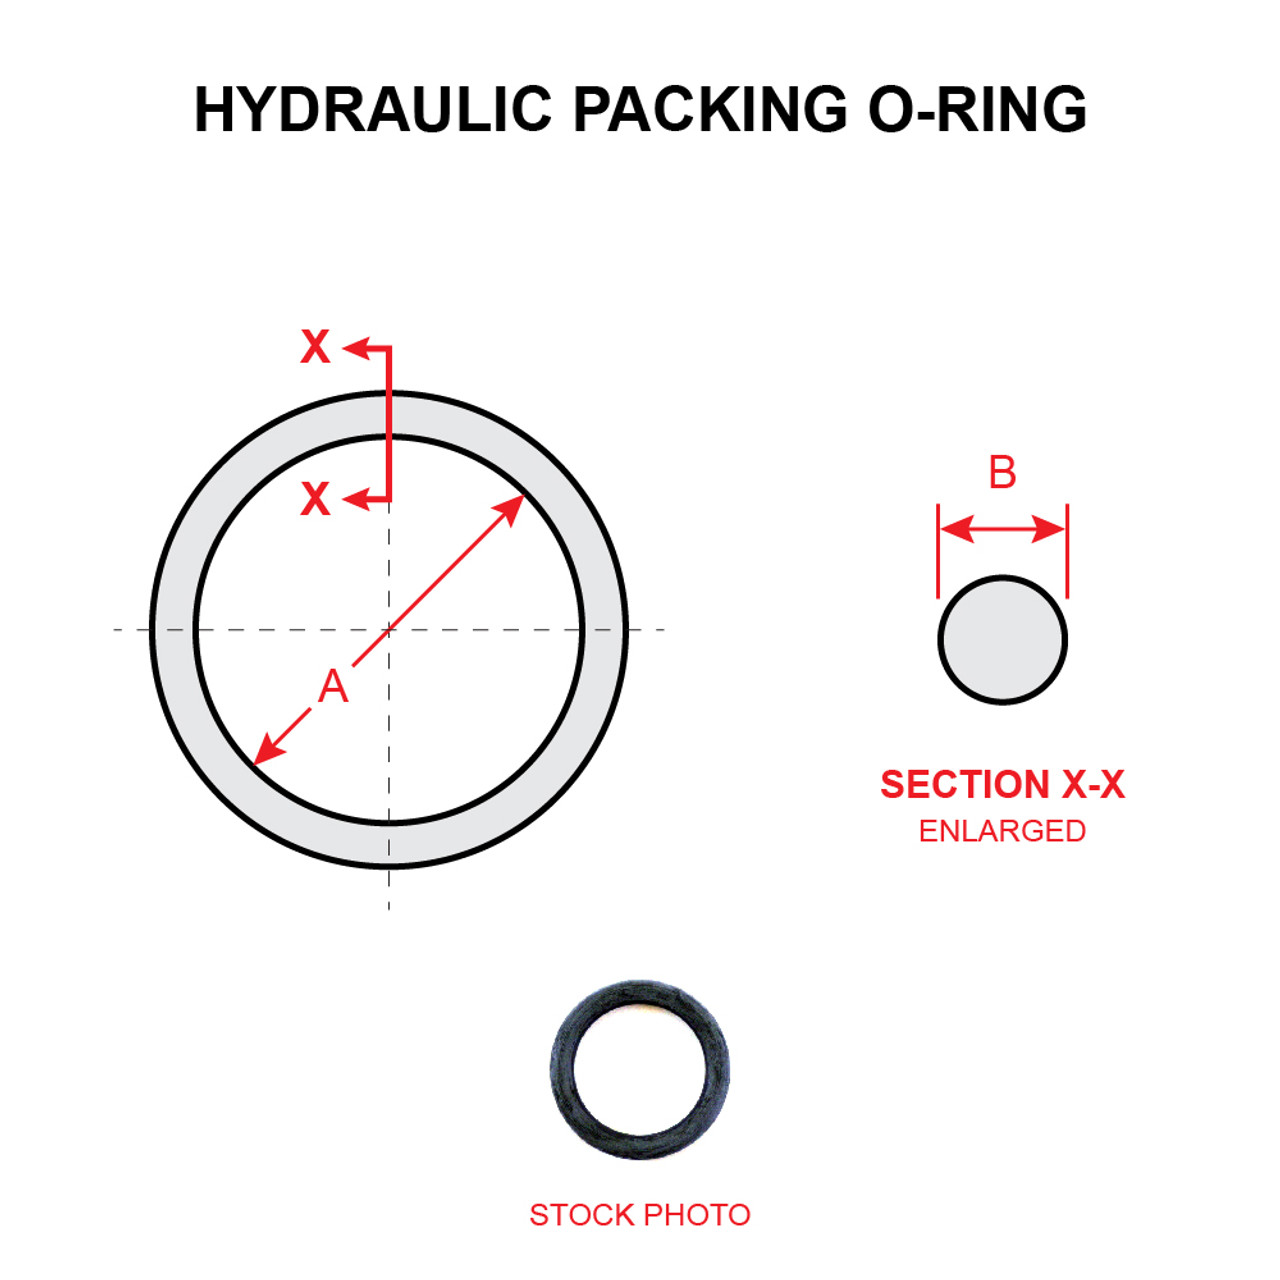 MS28775-223   HYDRAULIC PACKING O-RING